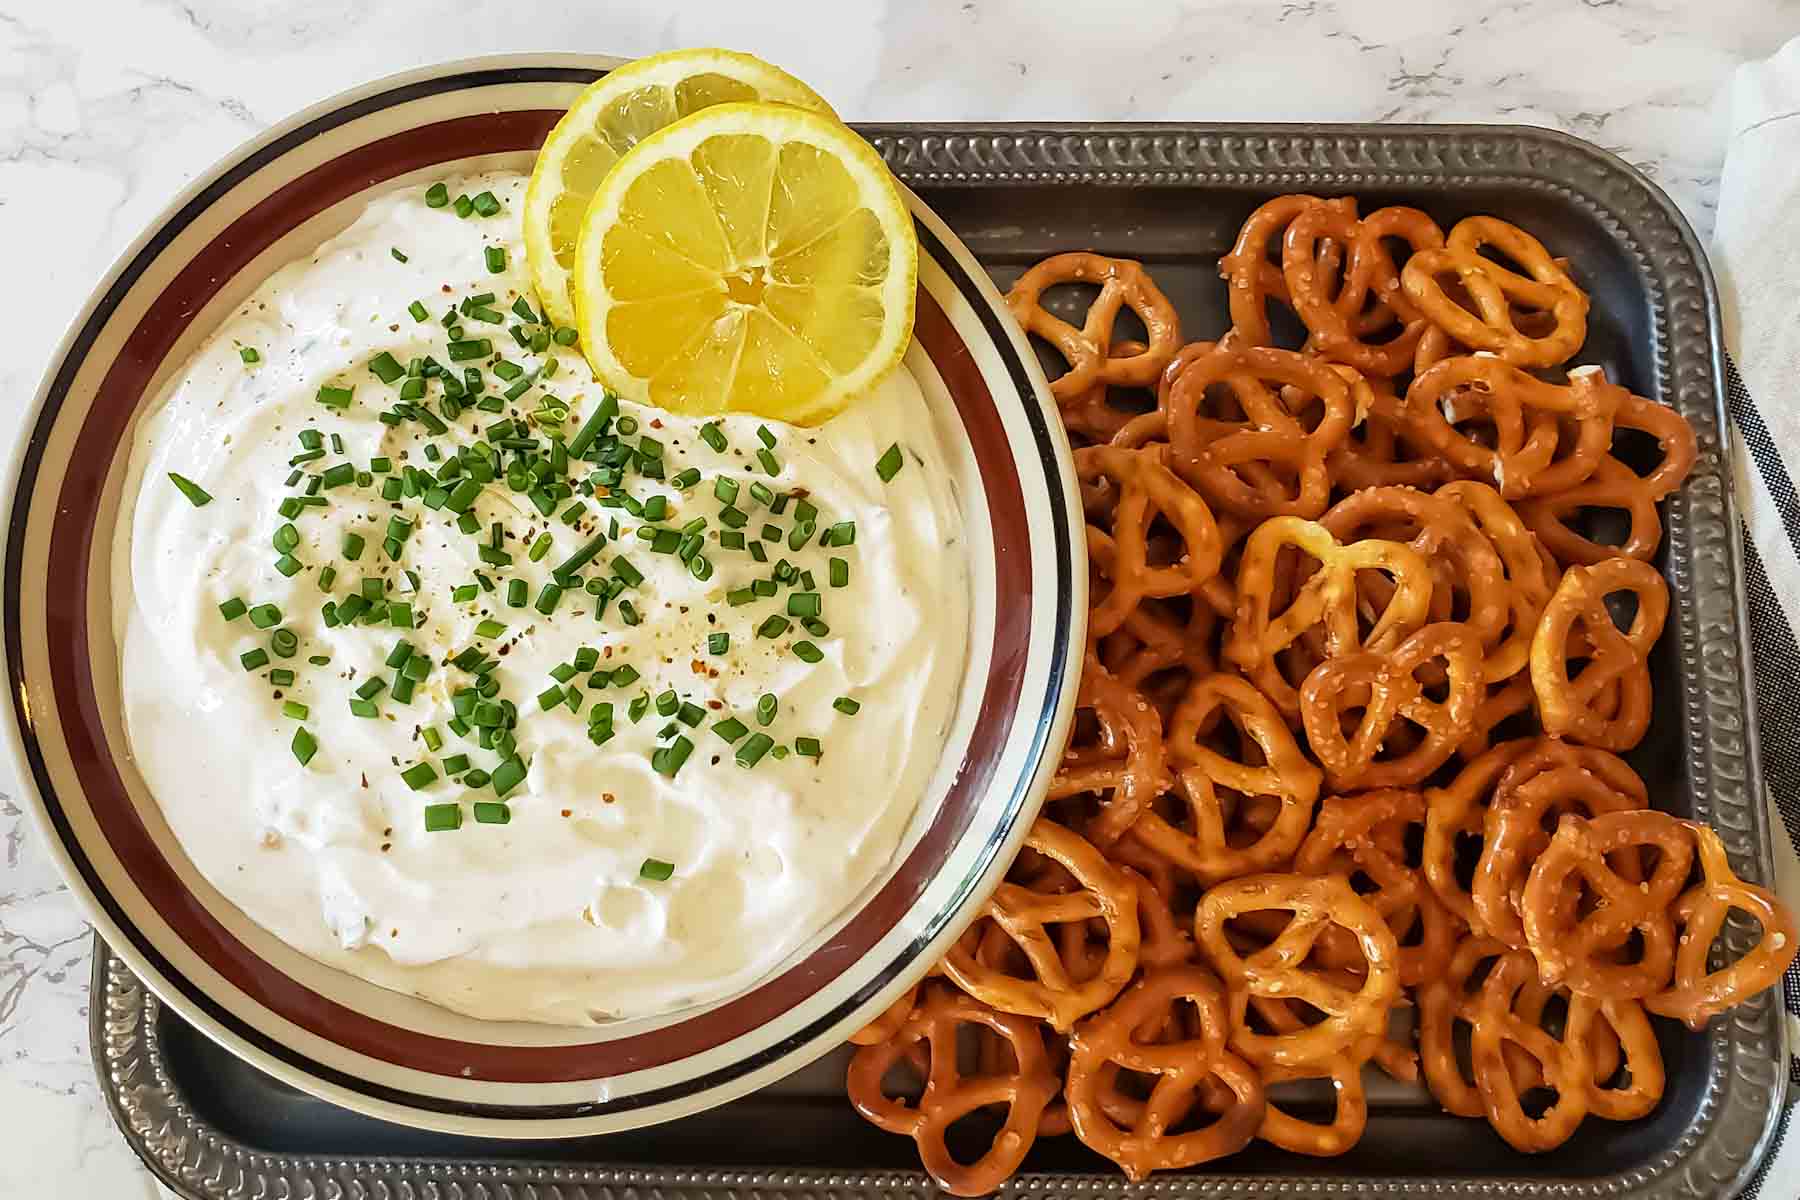 Prepared sour cream and chive dip served with garnishes and pretzel twists.